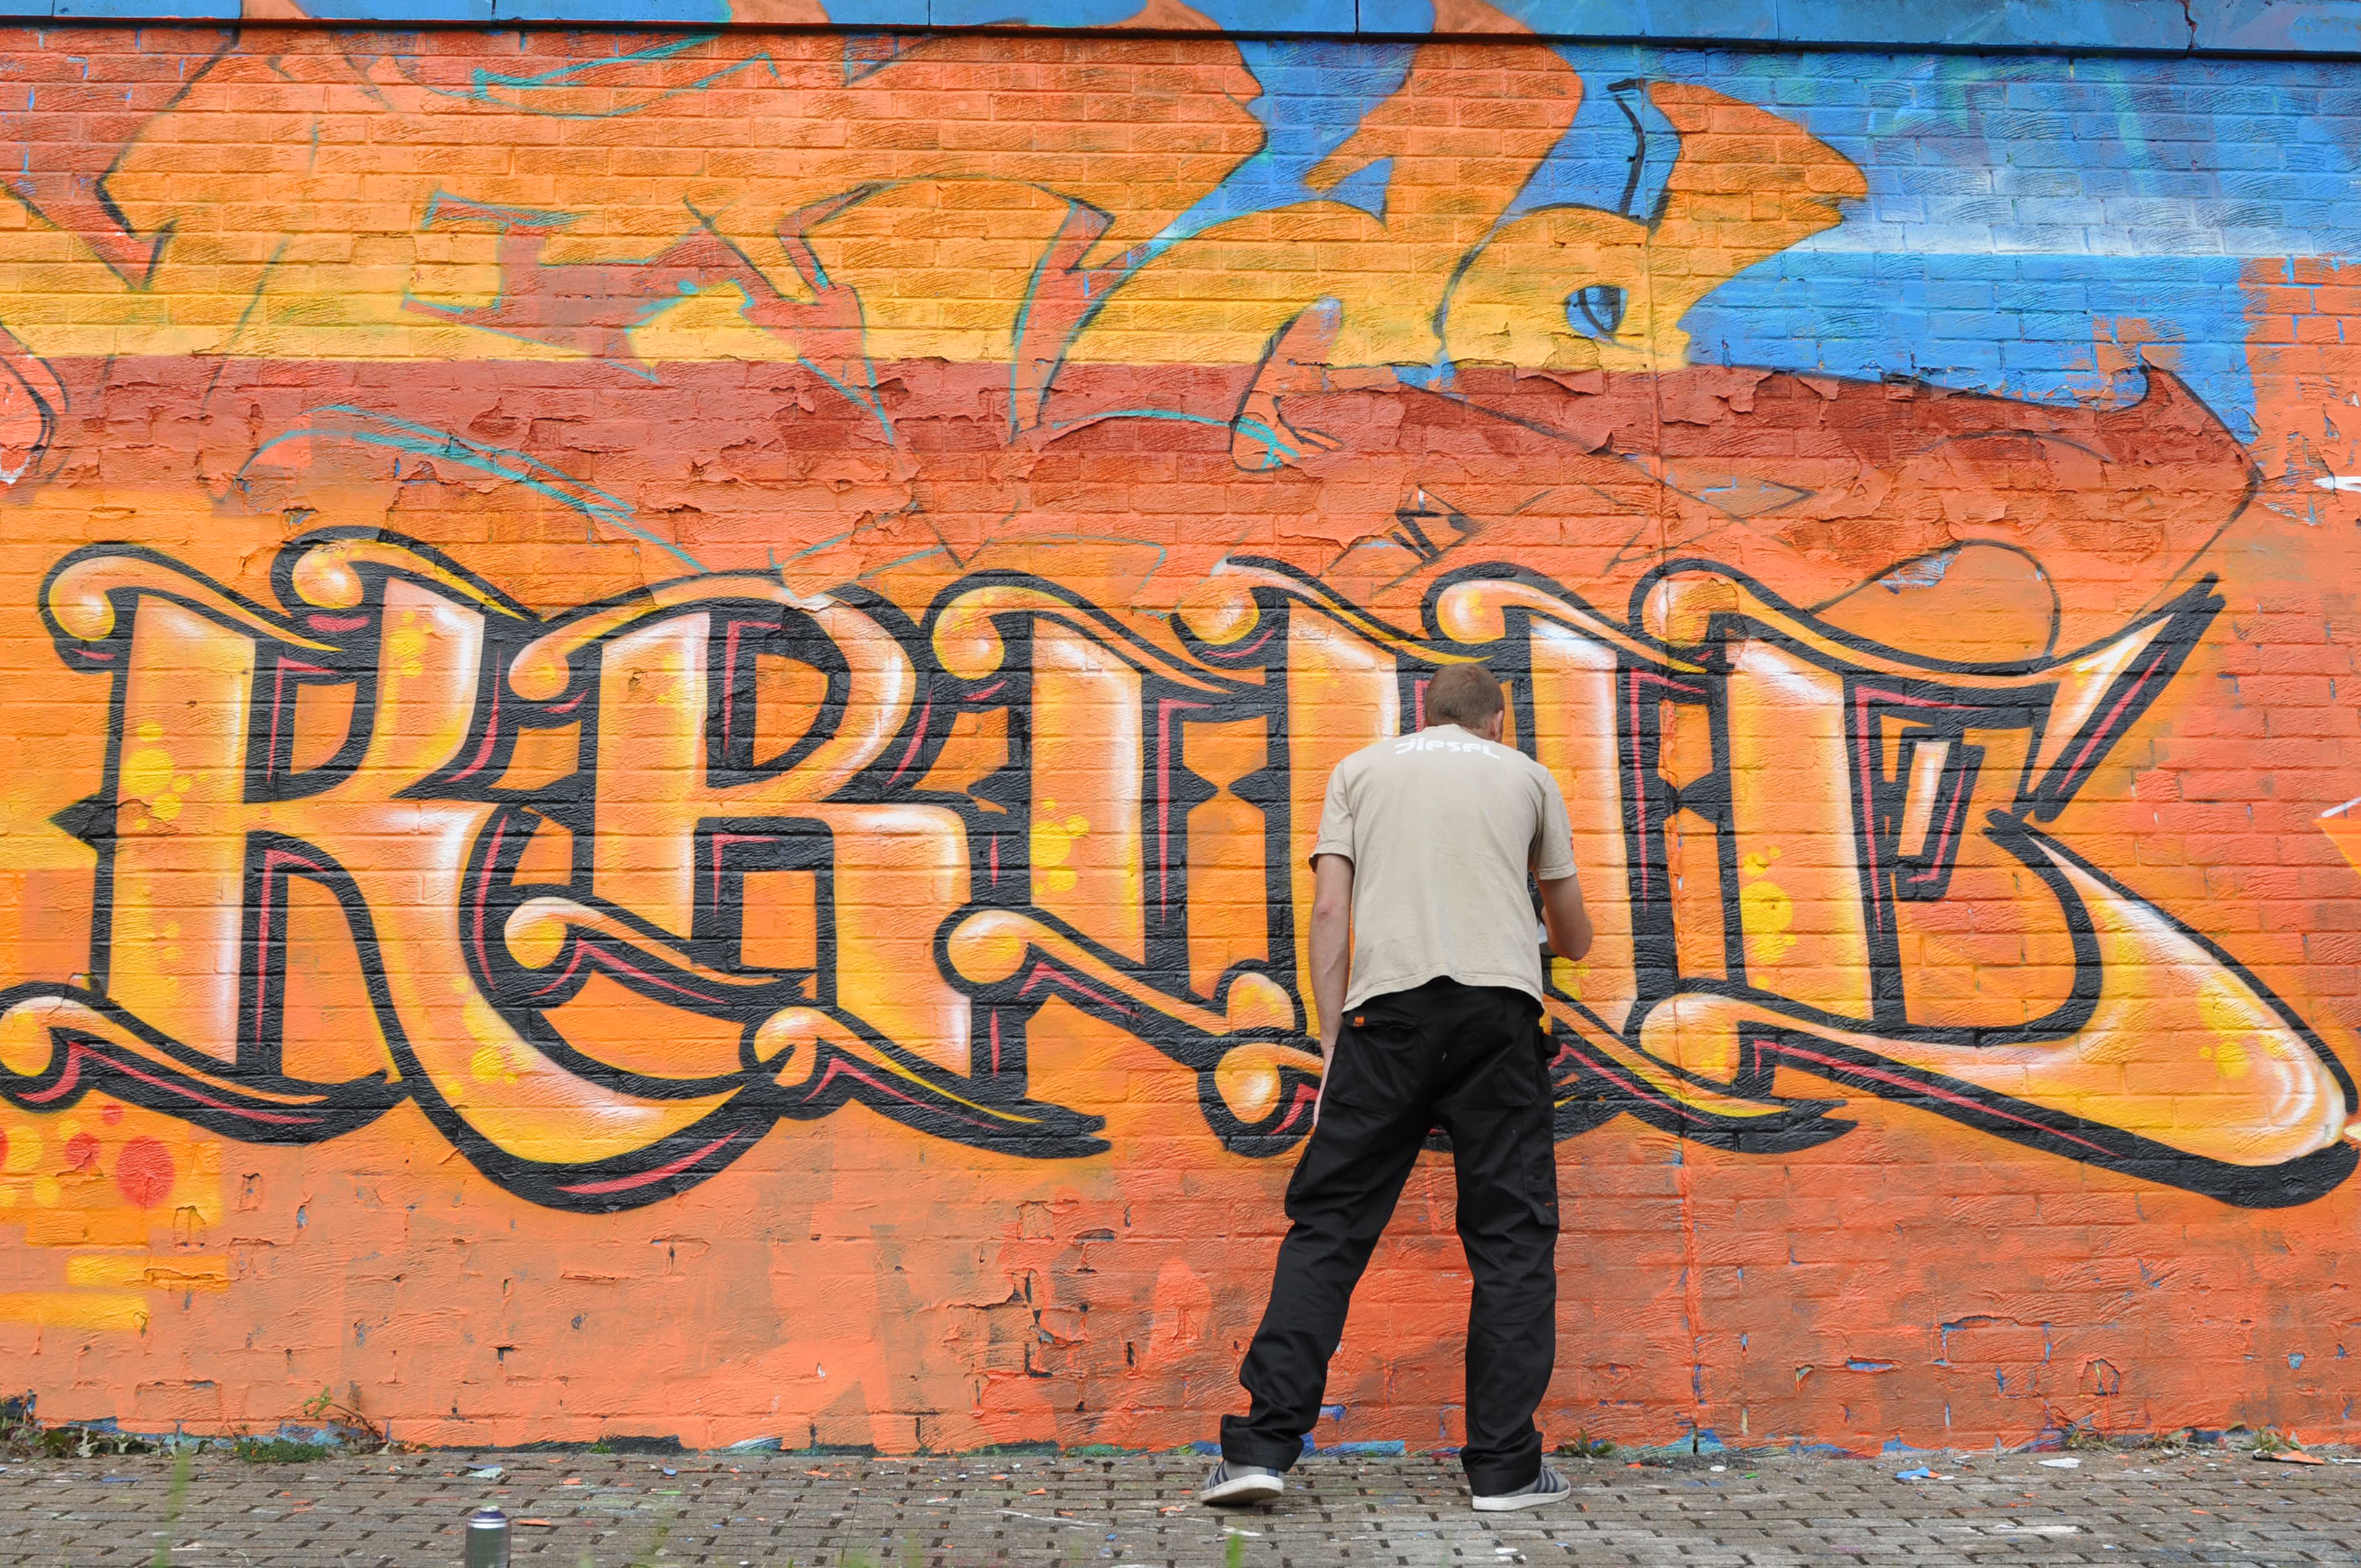 One of the graffiti artists at work